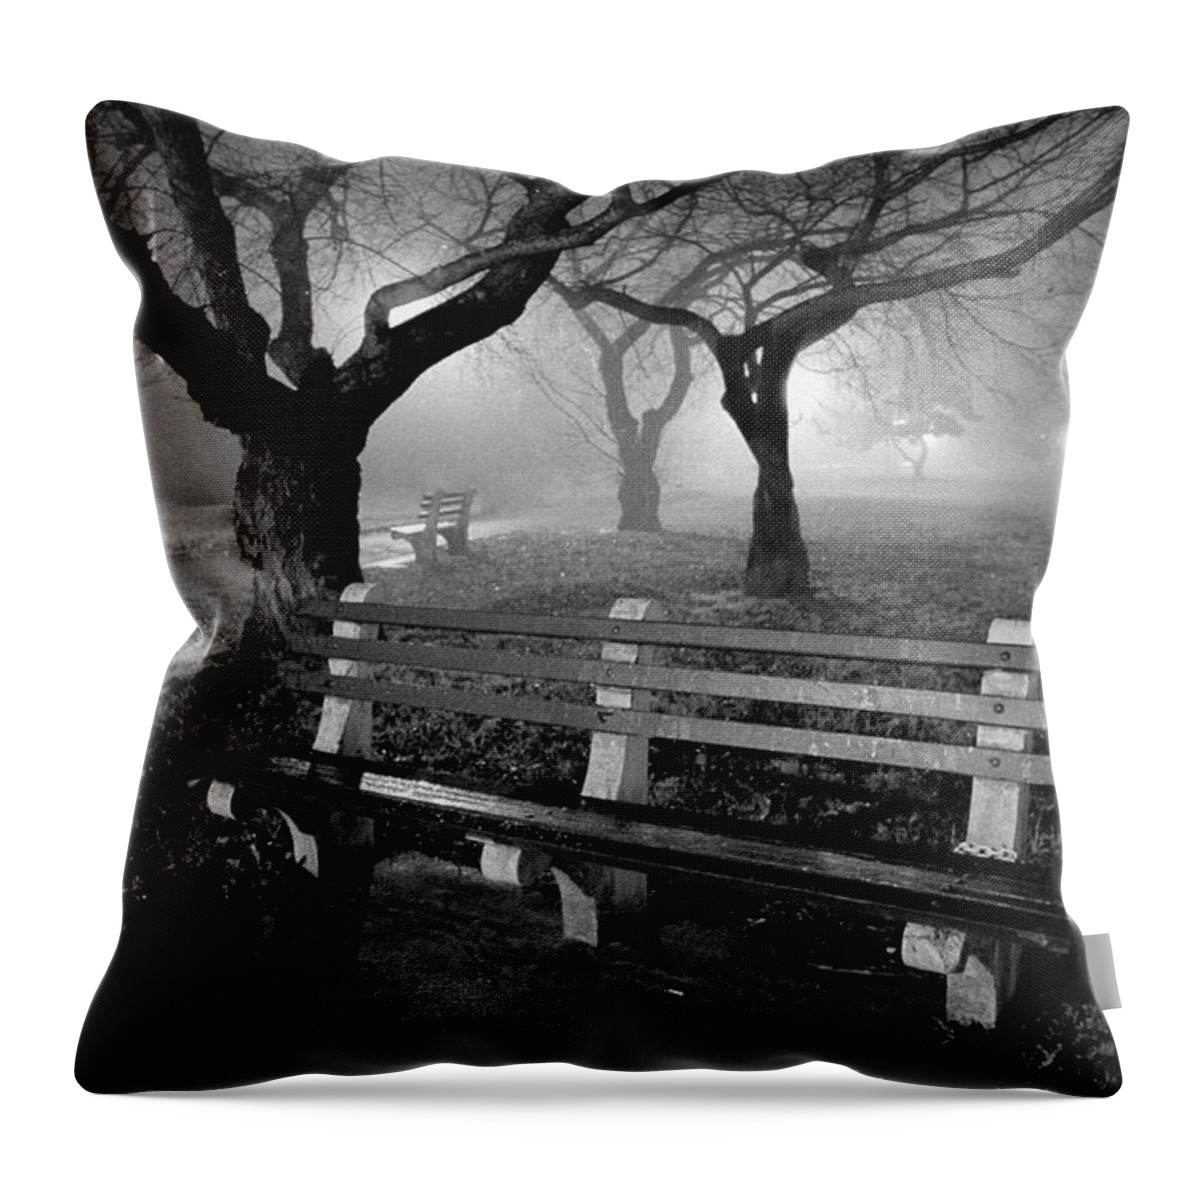 Foggy Throw Pillow featuring the photograph Park Benches by Gary Heller